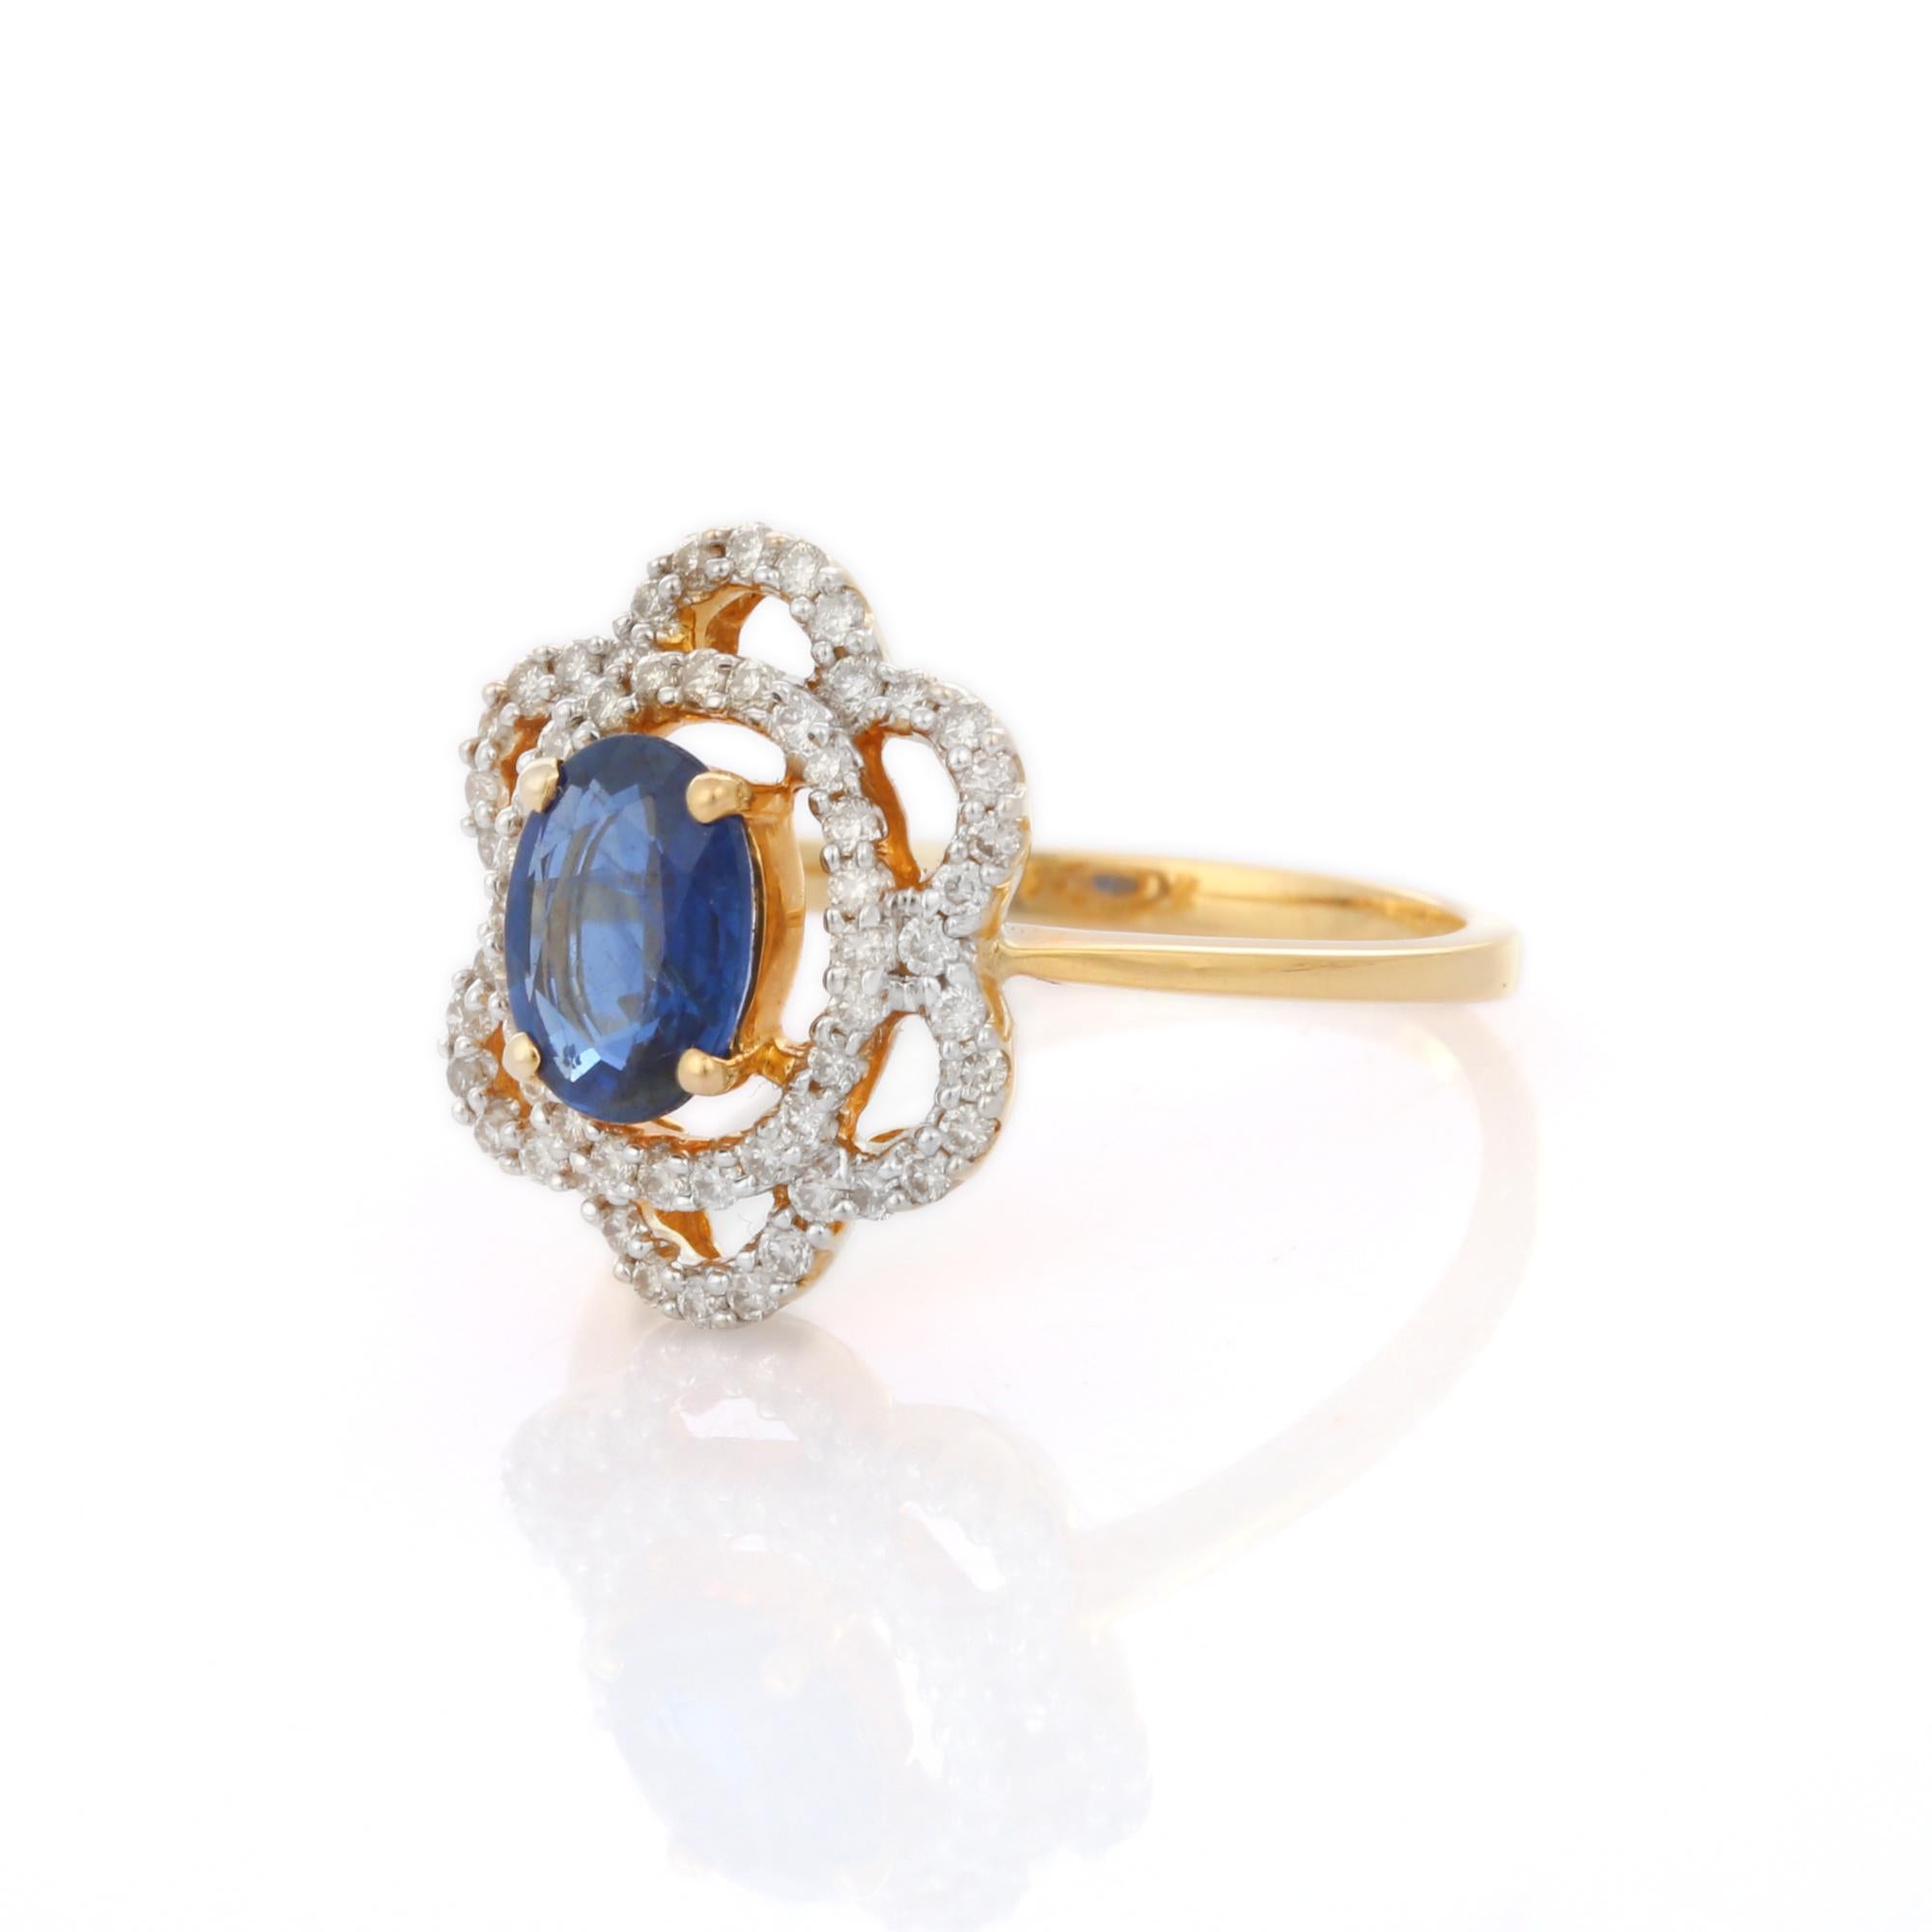 For Sale:  1.01 Ct Oval Blue Sapphire and Diamond Flower Wedding Ring in 18K Yellow Gold 3